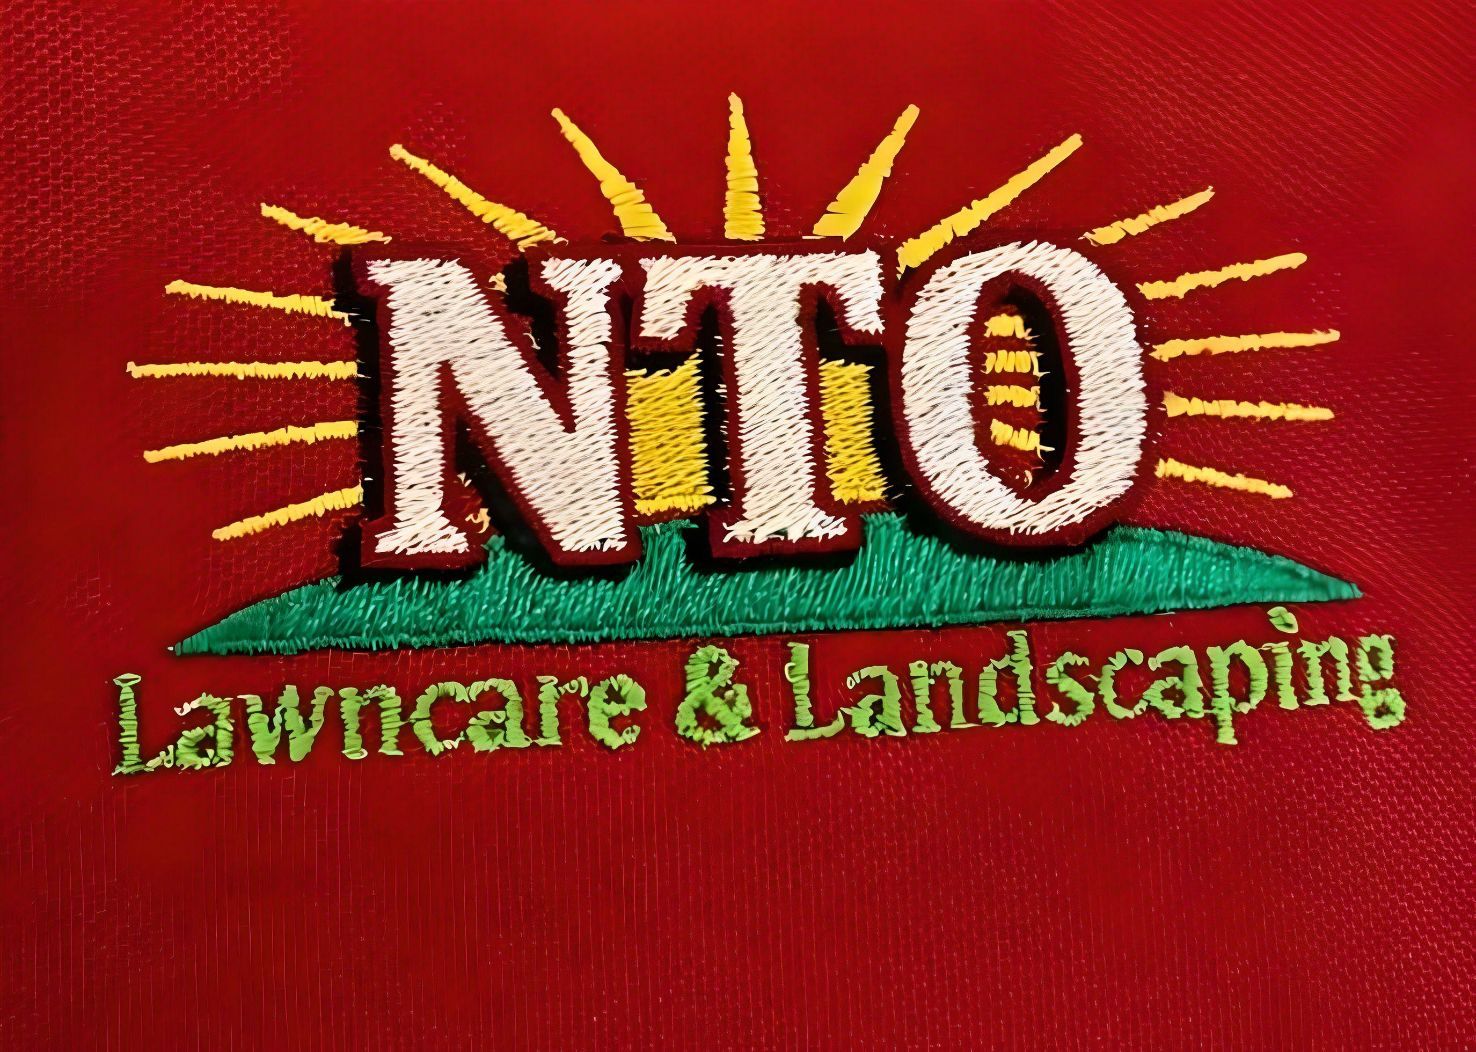 A nto lawn care and landscaping logo on a red shirt